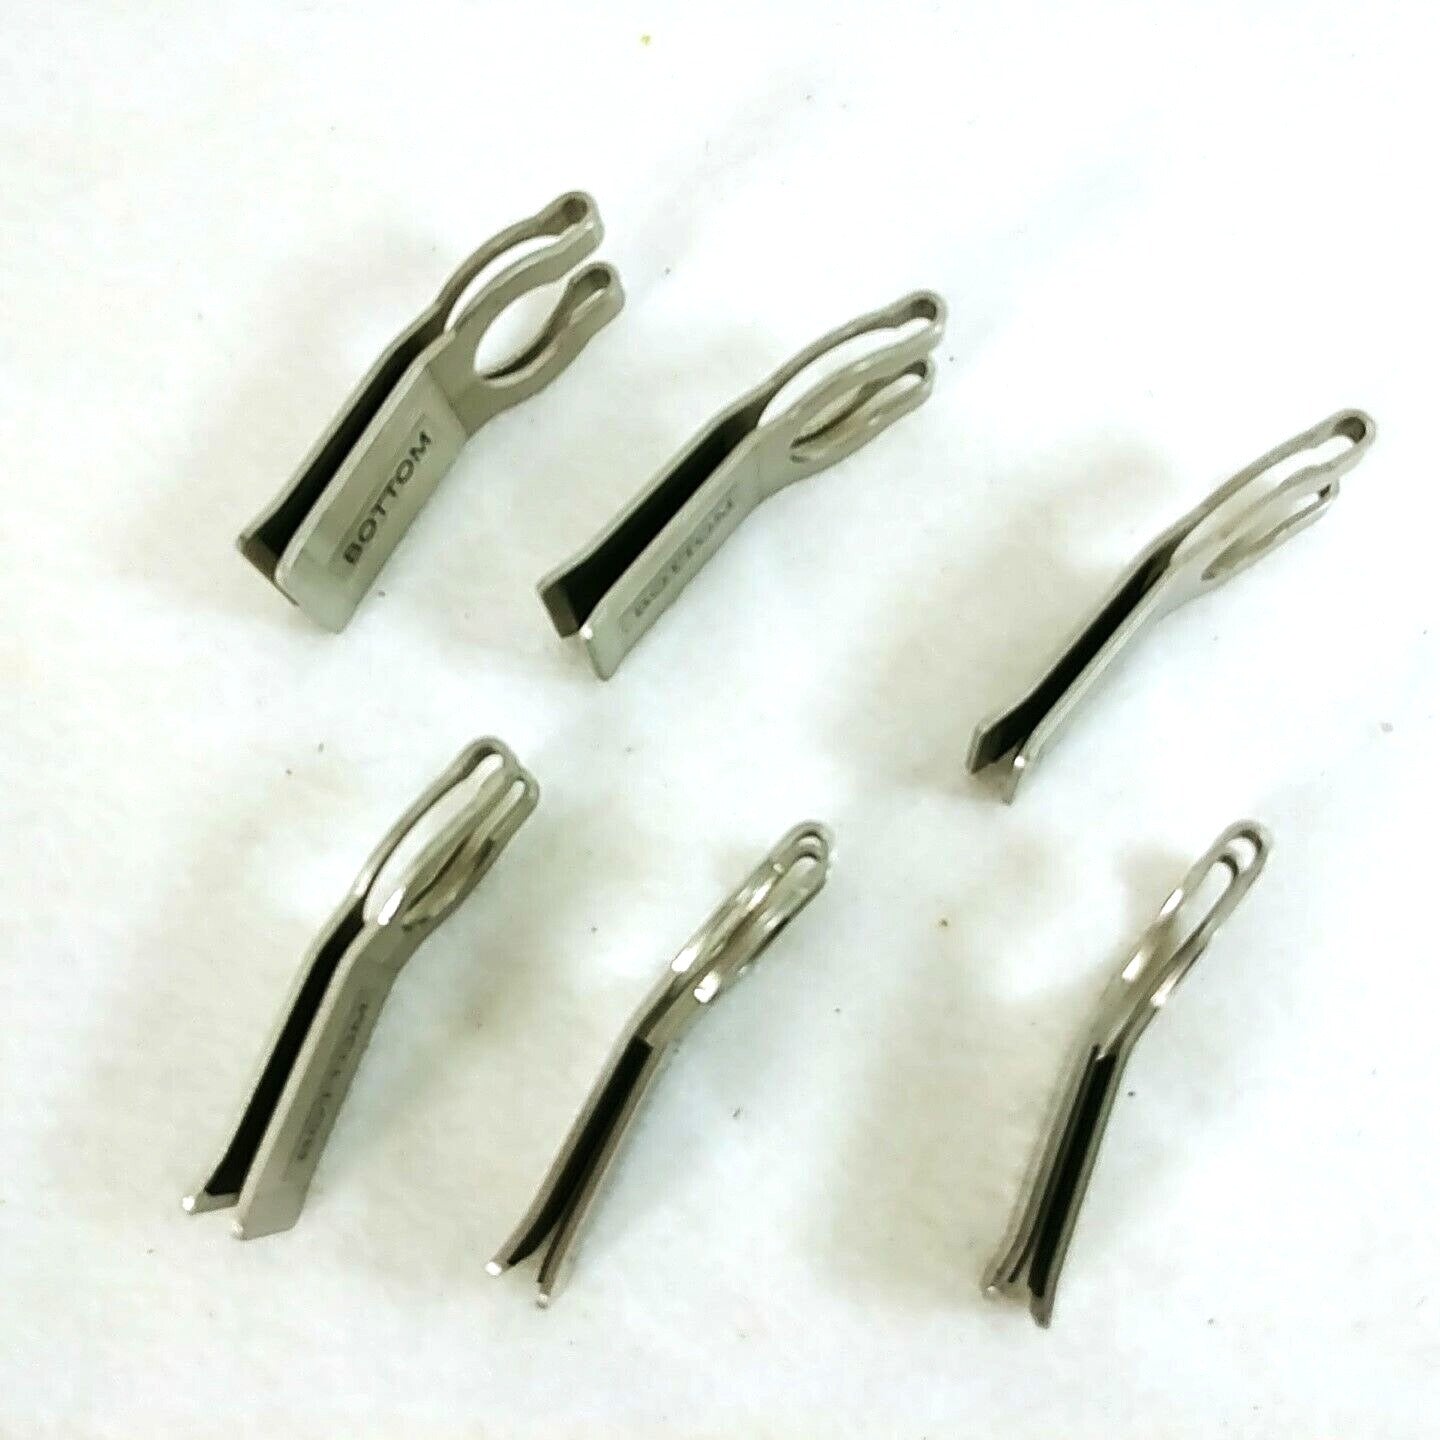 Stemware Plate Clips Set of 6 Original Box Metalla Stainless Steel Partyware